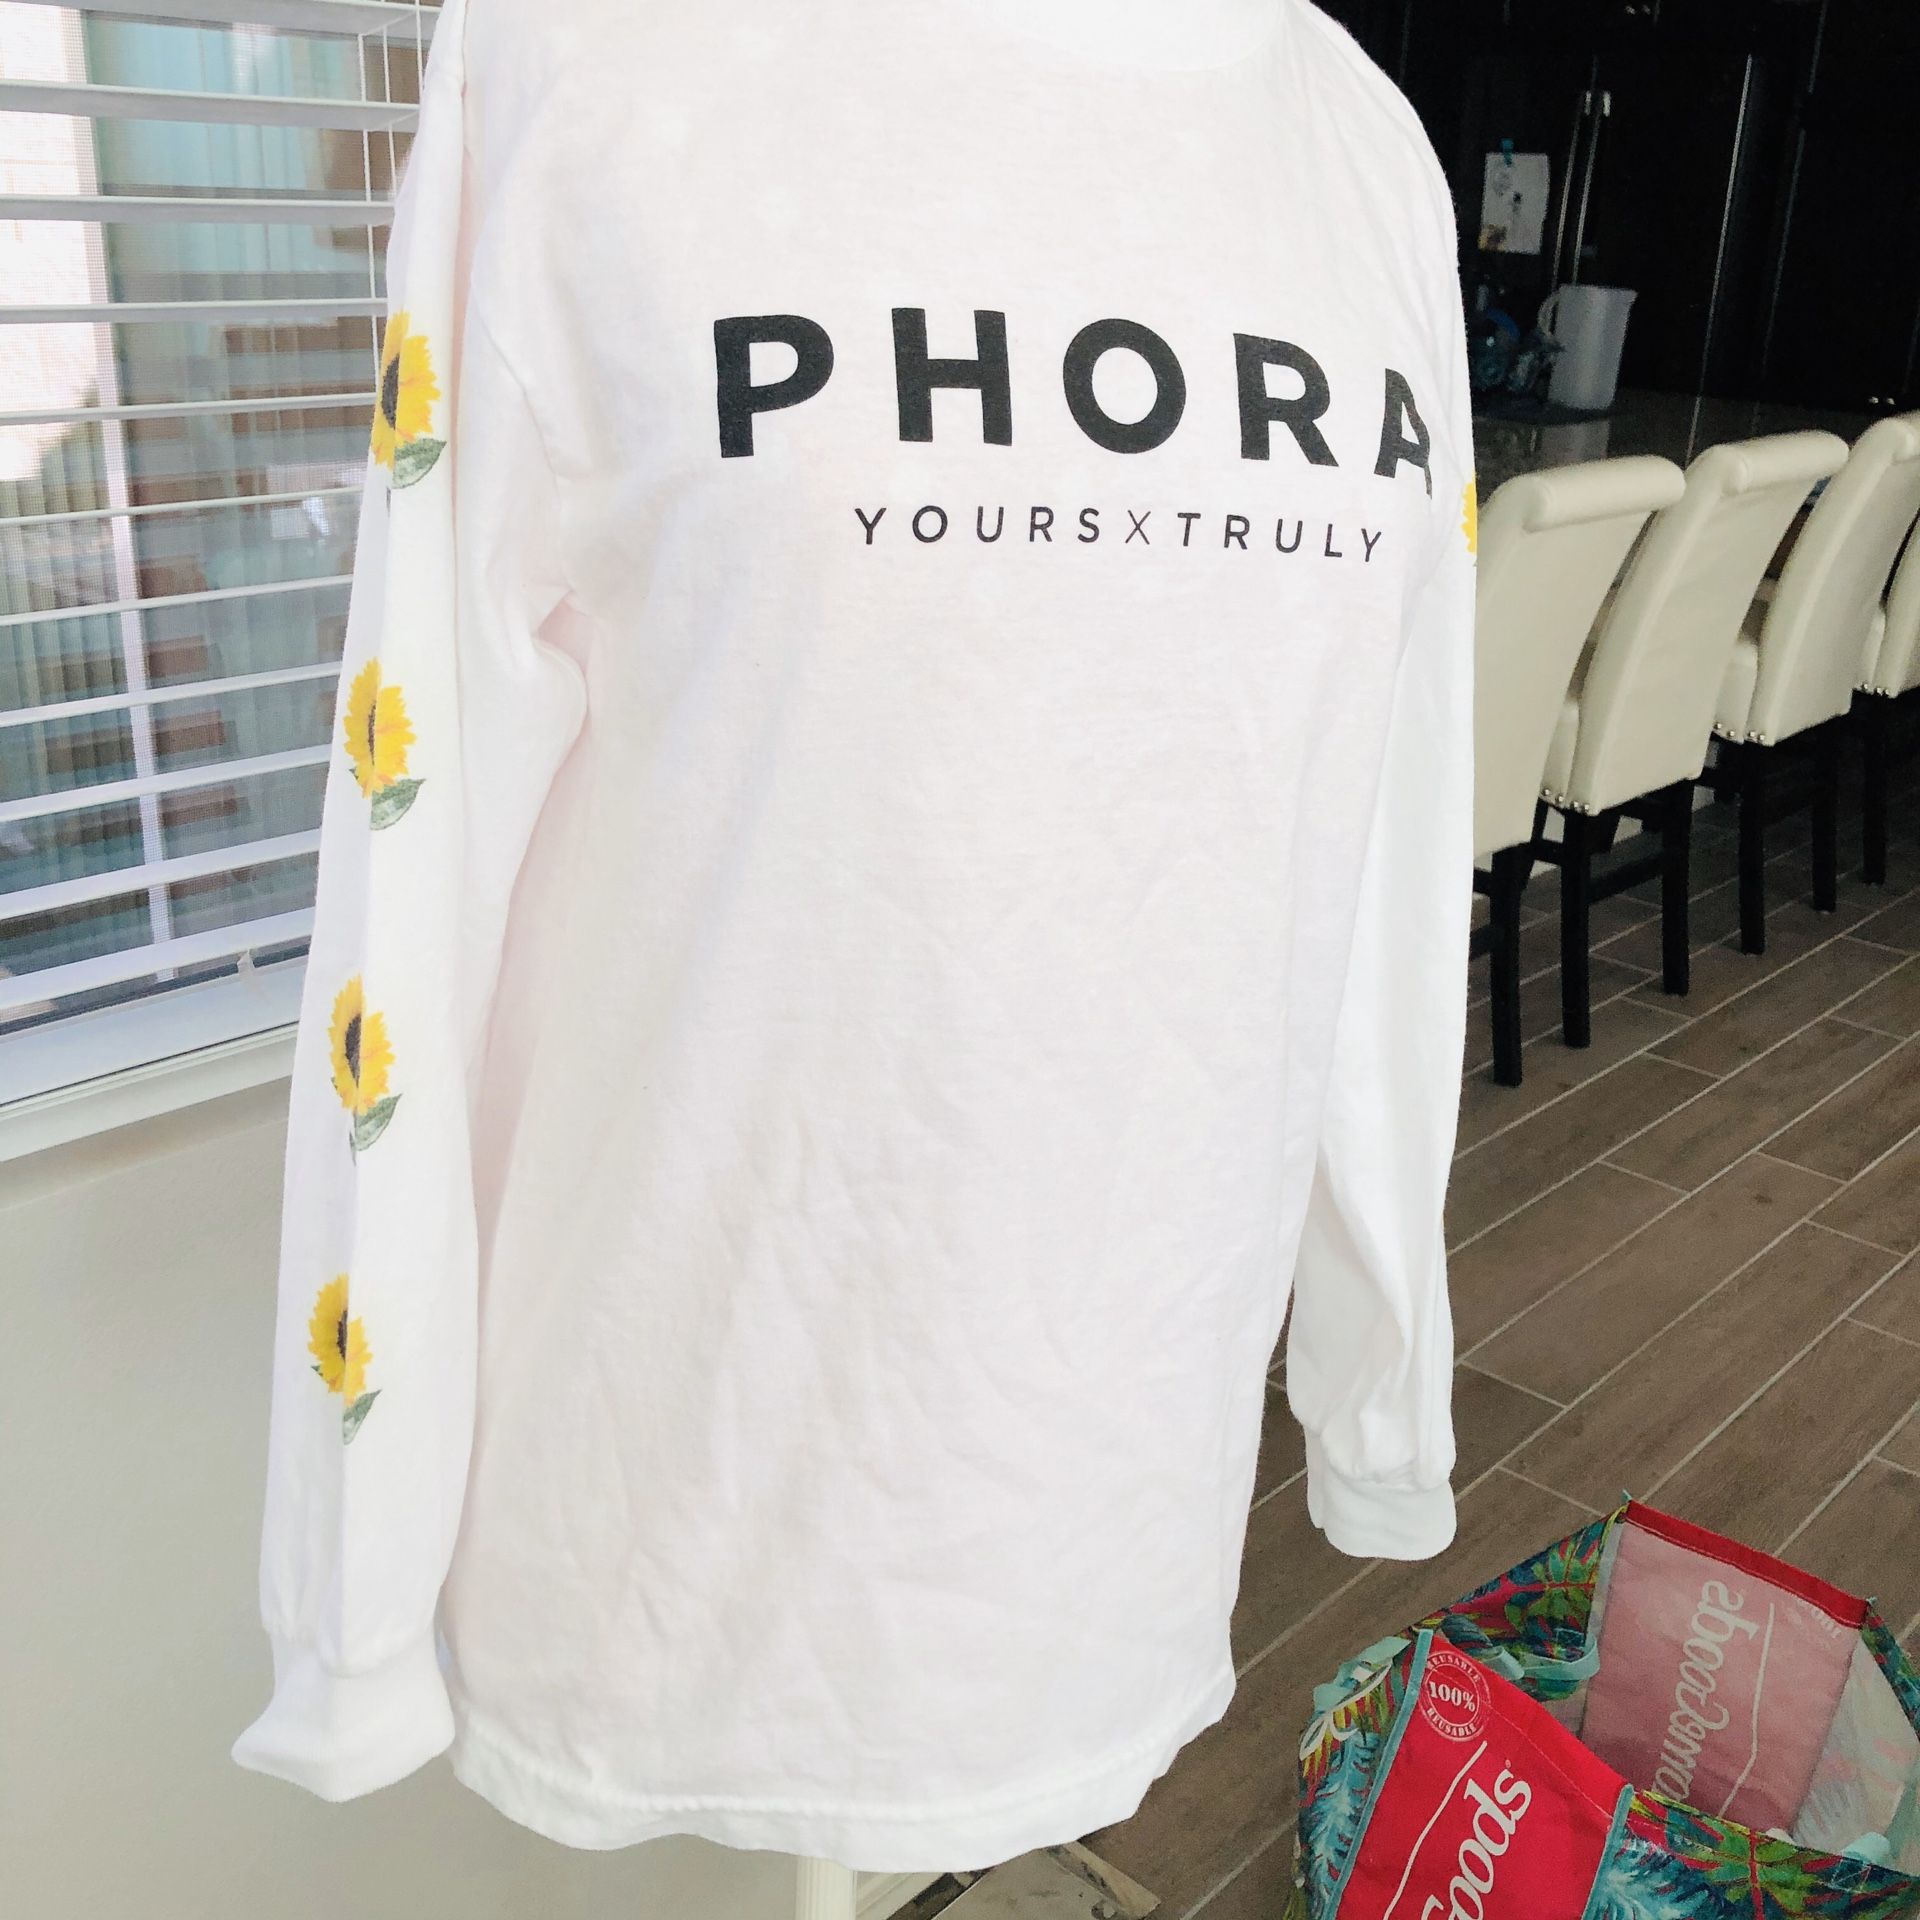 Phora (yours truly clothing )